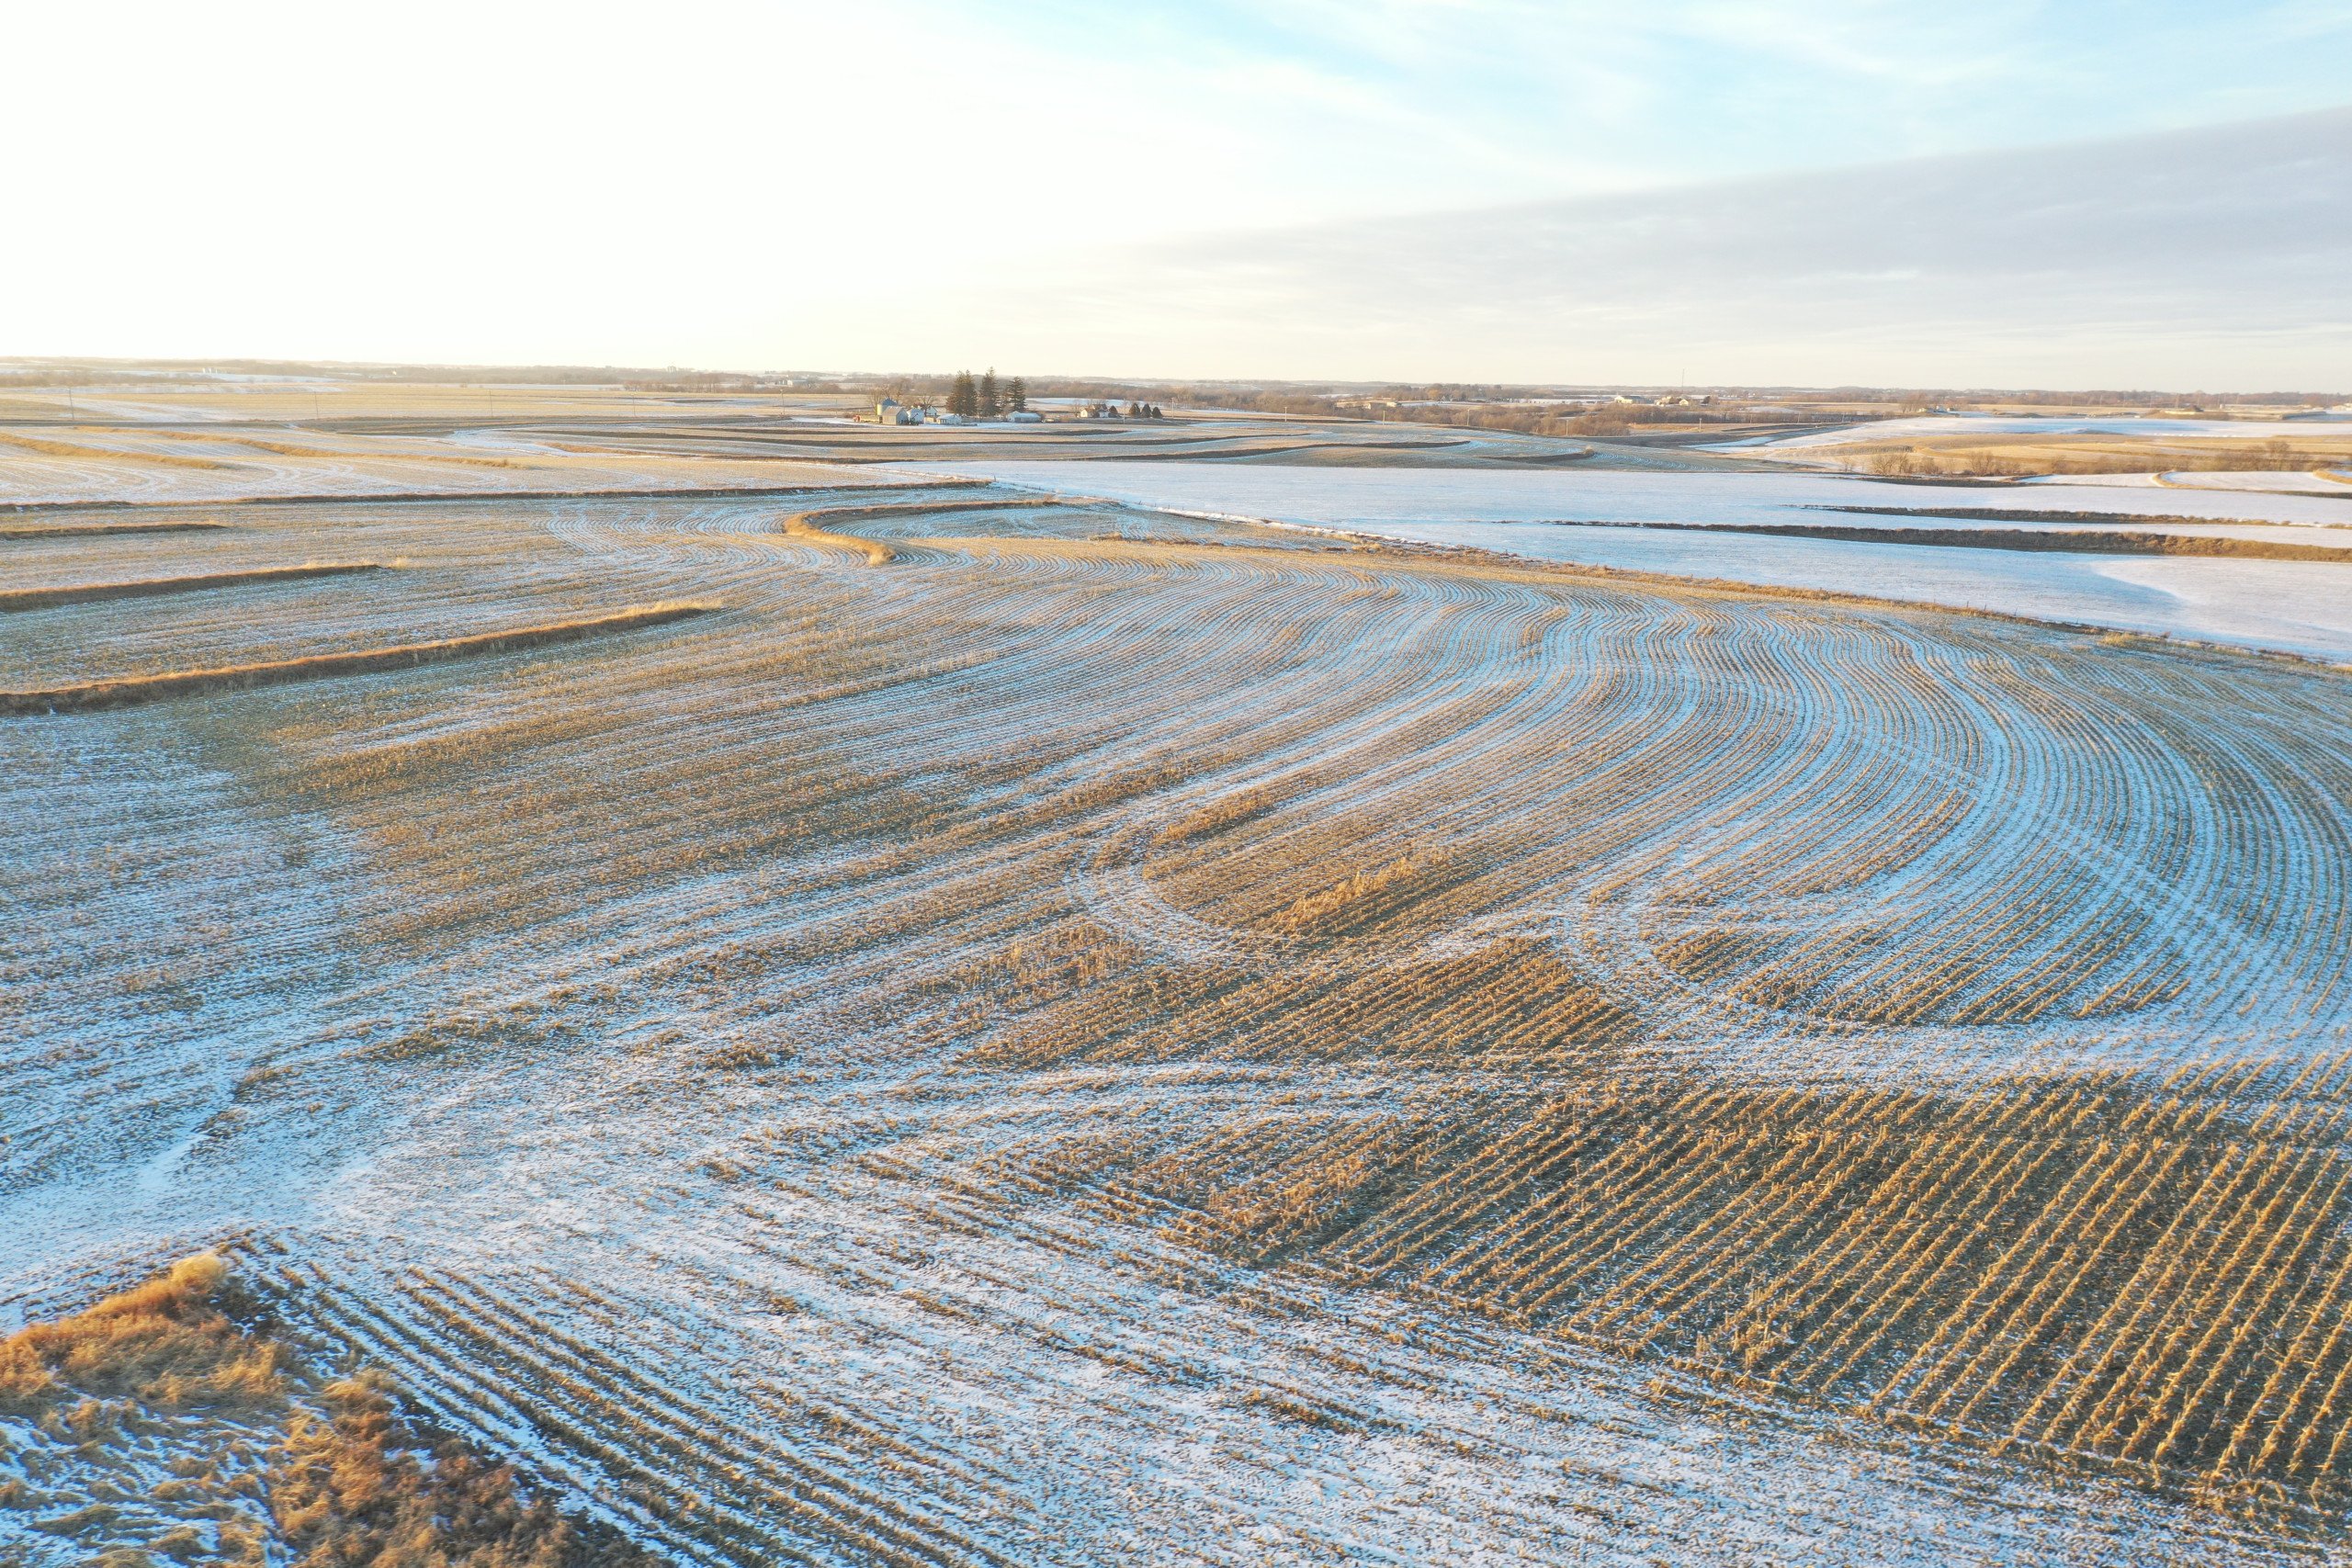 auctions-land-marion-county-iowa-75-acres-listing-number-16639-DJI_0025-1.jpg